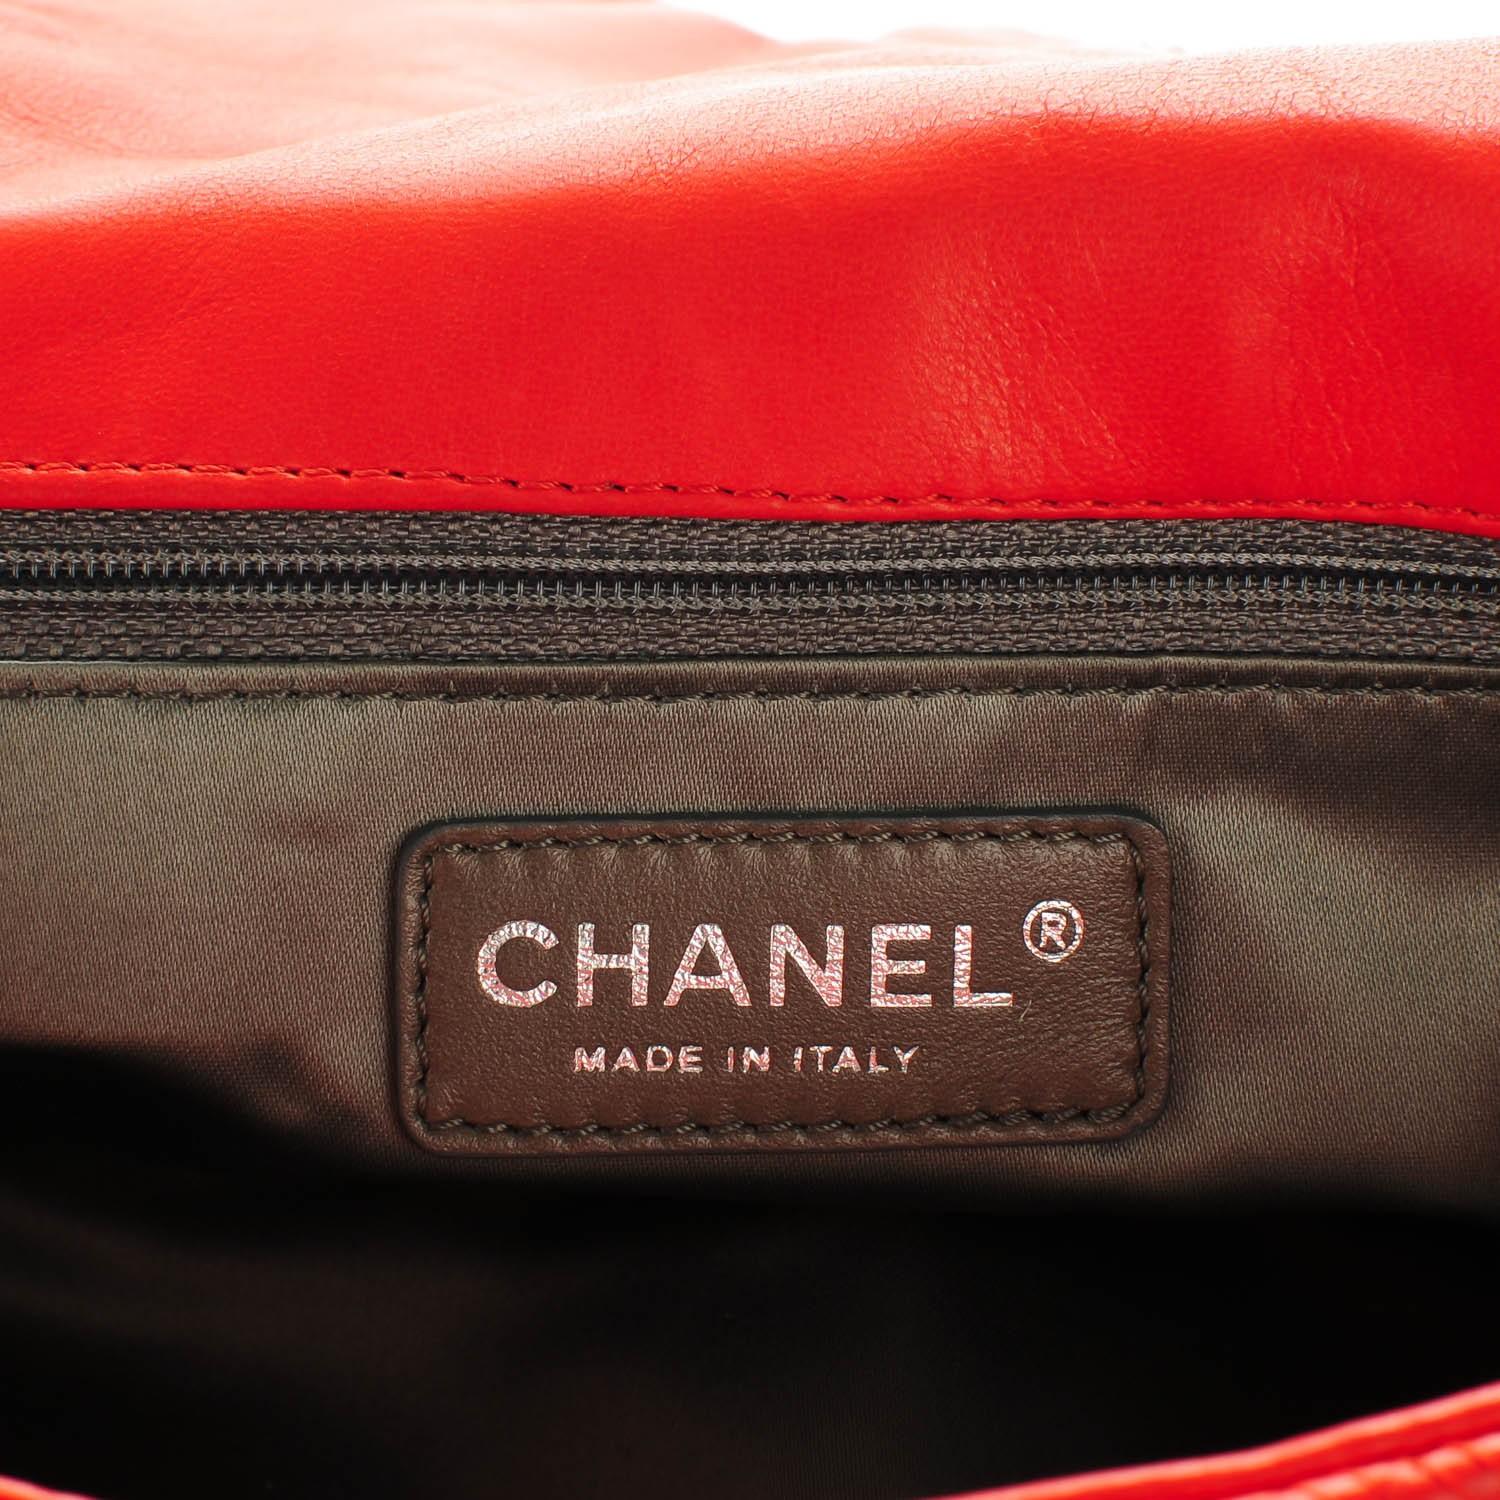 Chanel 2006 Rare Neon Red Coral Soft Lambskin Stitched Medium Classic Flap Bag For Sale 5